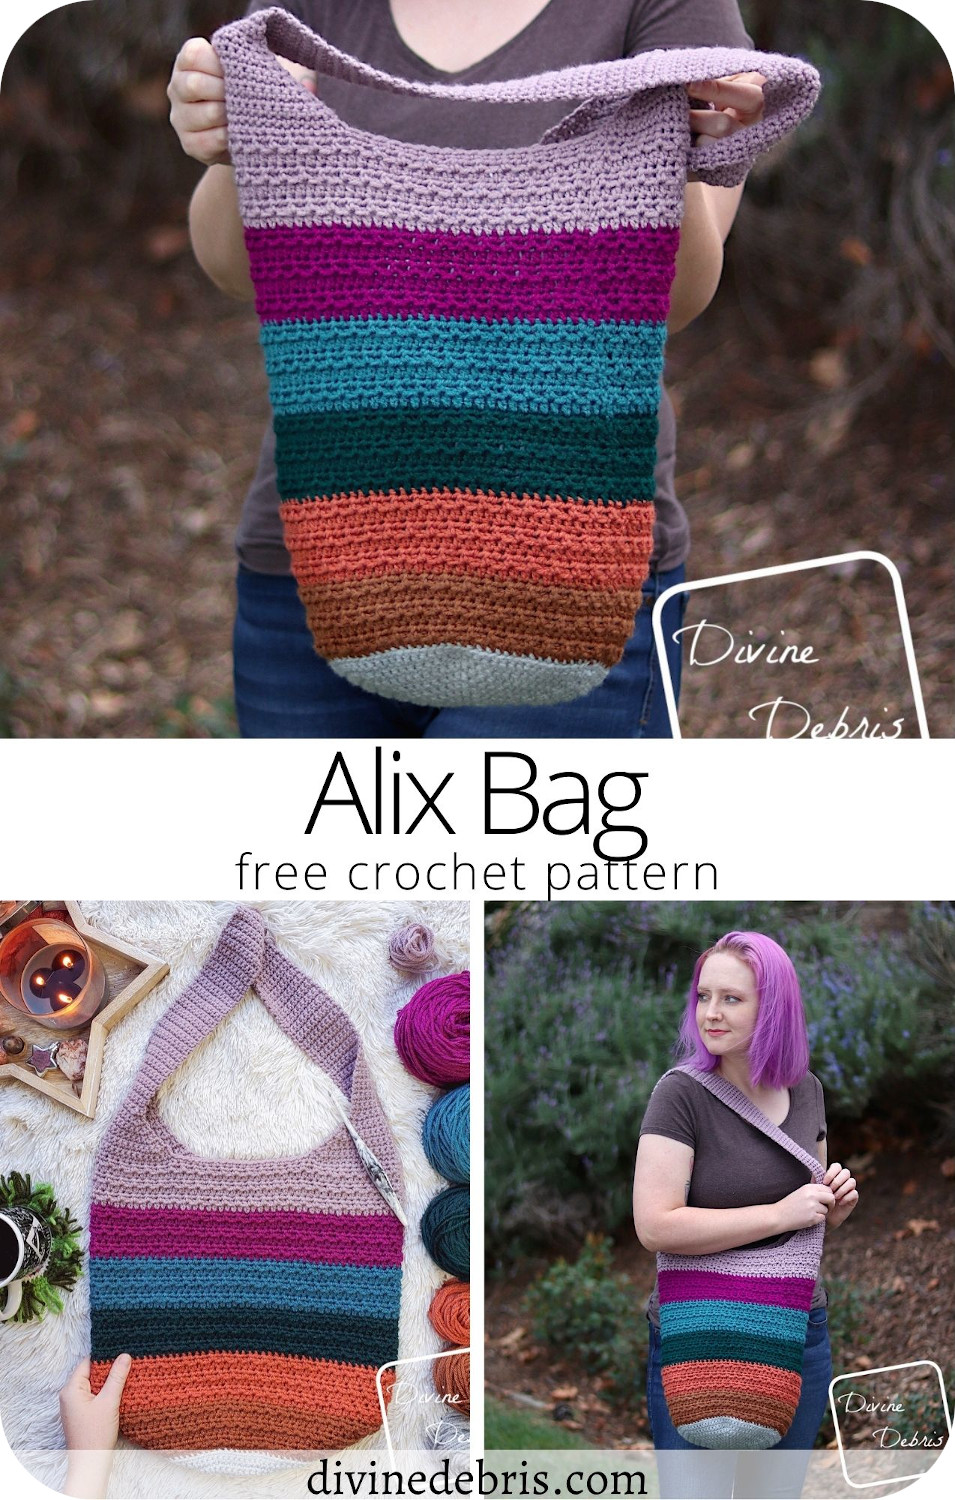 Learn to make a fun and deliciously textured bag with lots of room for creativity, the Alix Bag crochet pattern free from DivineDebris.com